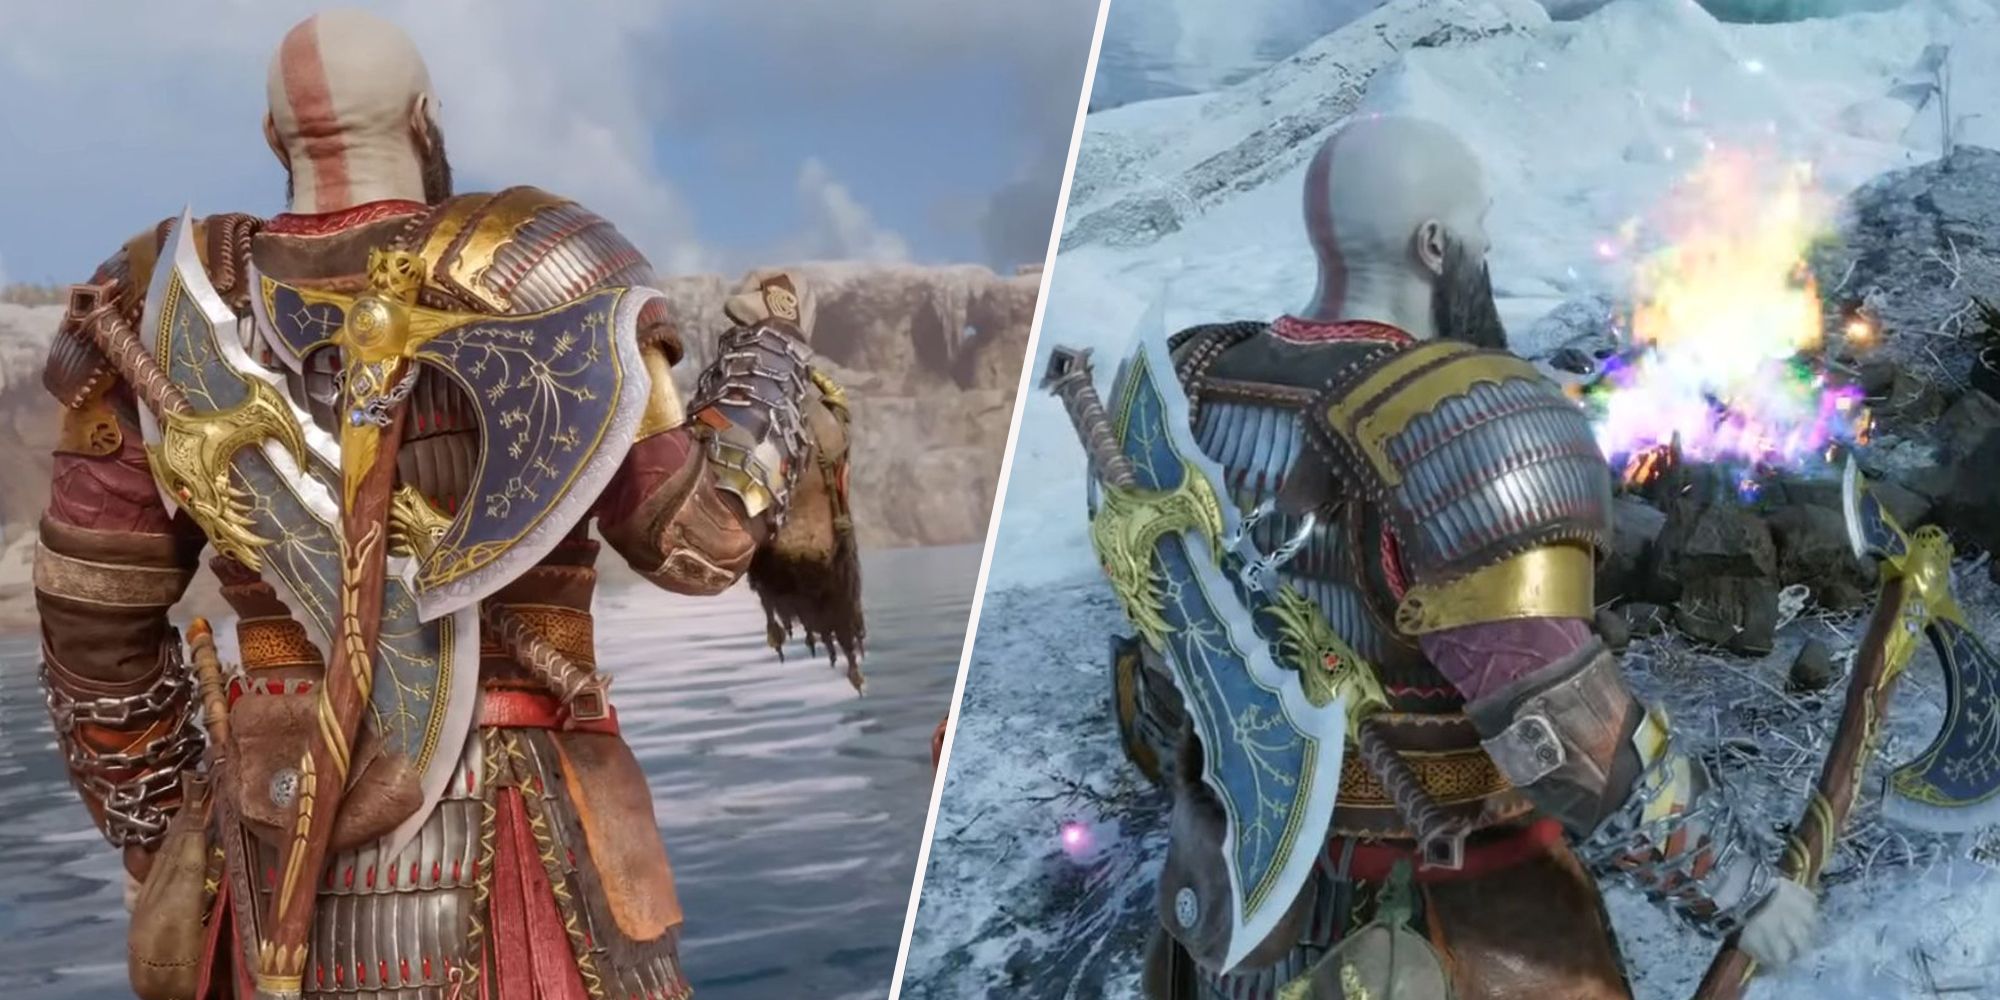 Split image with two photos of Kratos. The left photo is Kratos holding Mimir's head up to something. The right photo is Kratos looking slightly to his right while holding his axe.